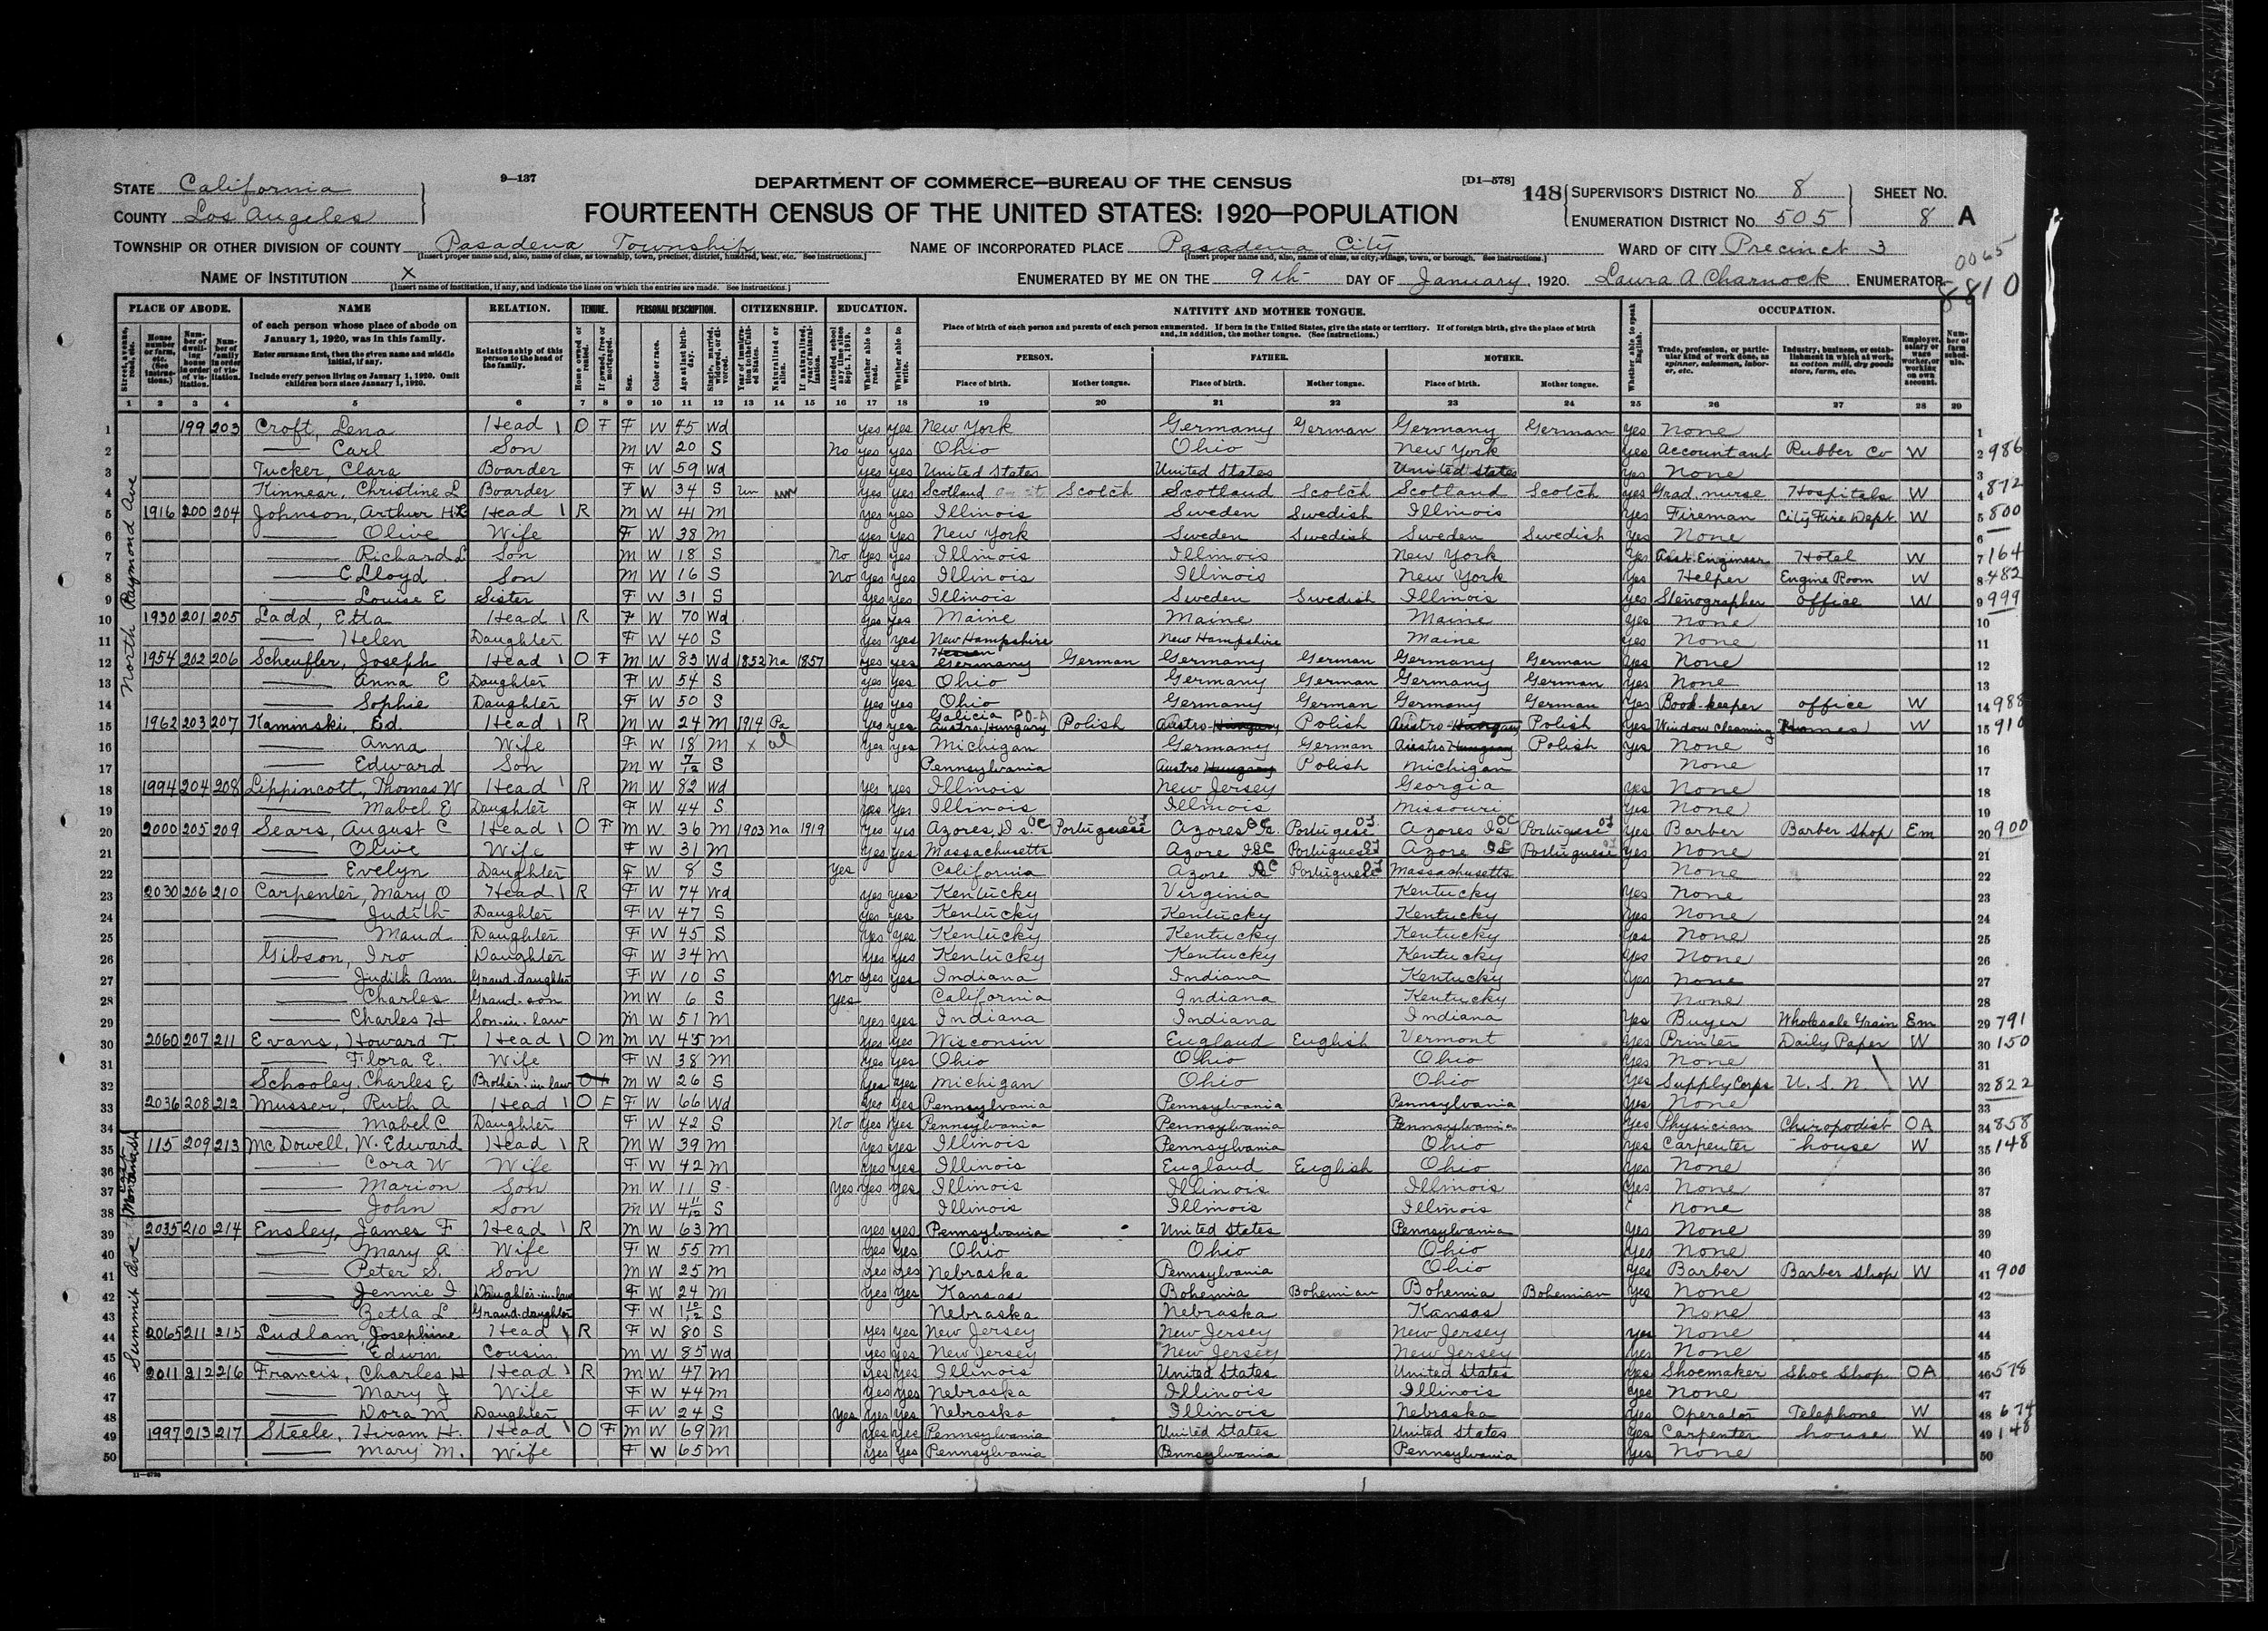  U.S. Census 1920, Pasadena Township, Los Angeles, Calif.   Bob’s grandfather Charles, 47, continues as a shoemaker. He, Mary, 44, and Dora, 24, now a telephone operator, live at the same address. Jim, Bob’s father, has by now married Lillian Frances